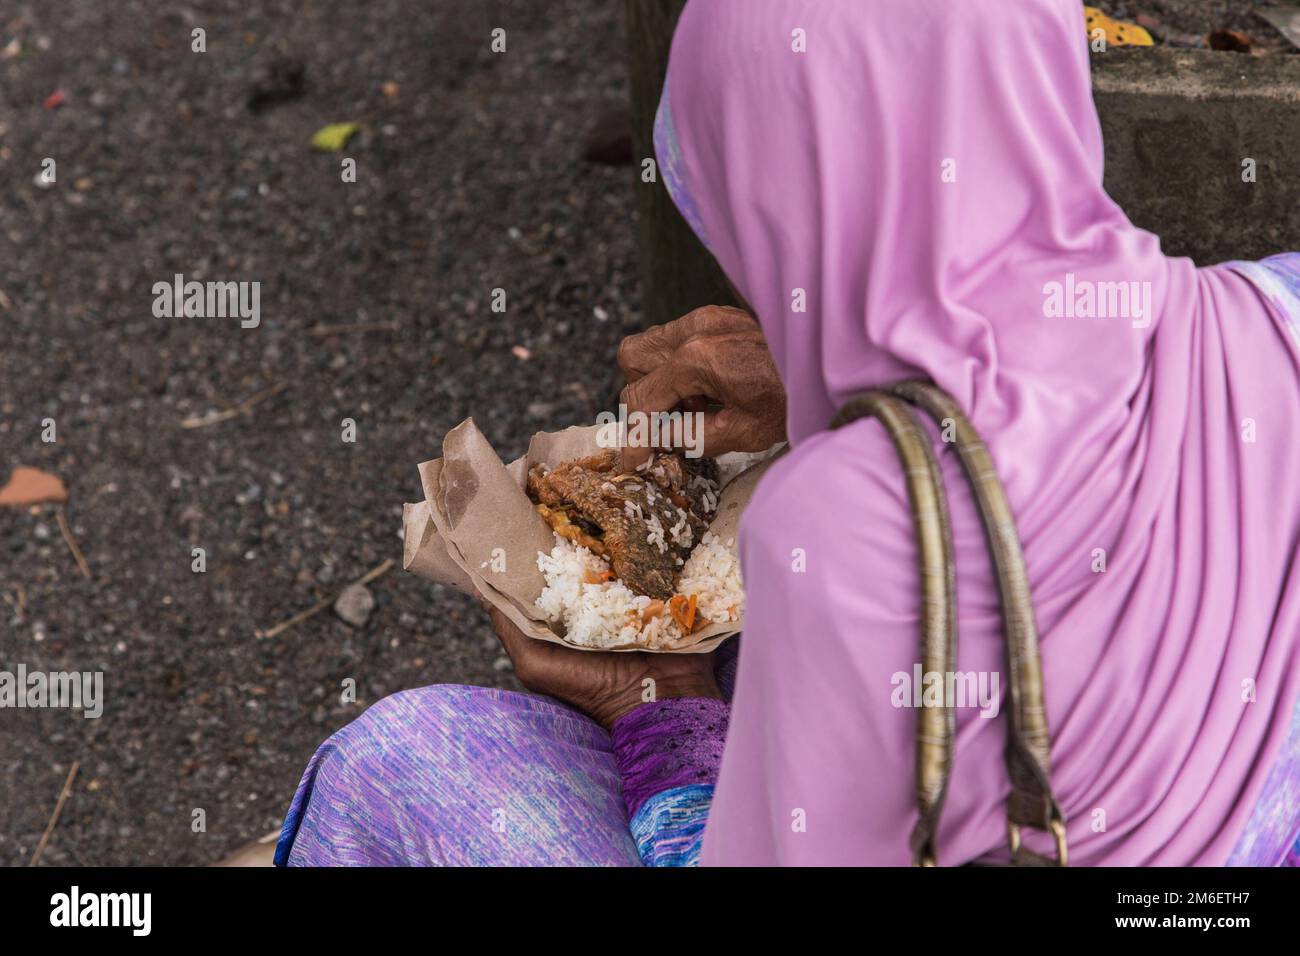 indonesian woman enjoying her lunch in the street. Stock Photo